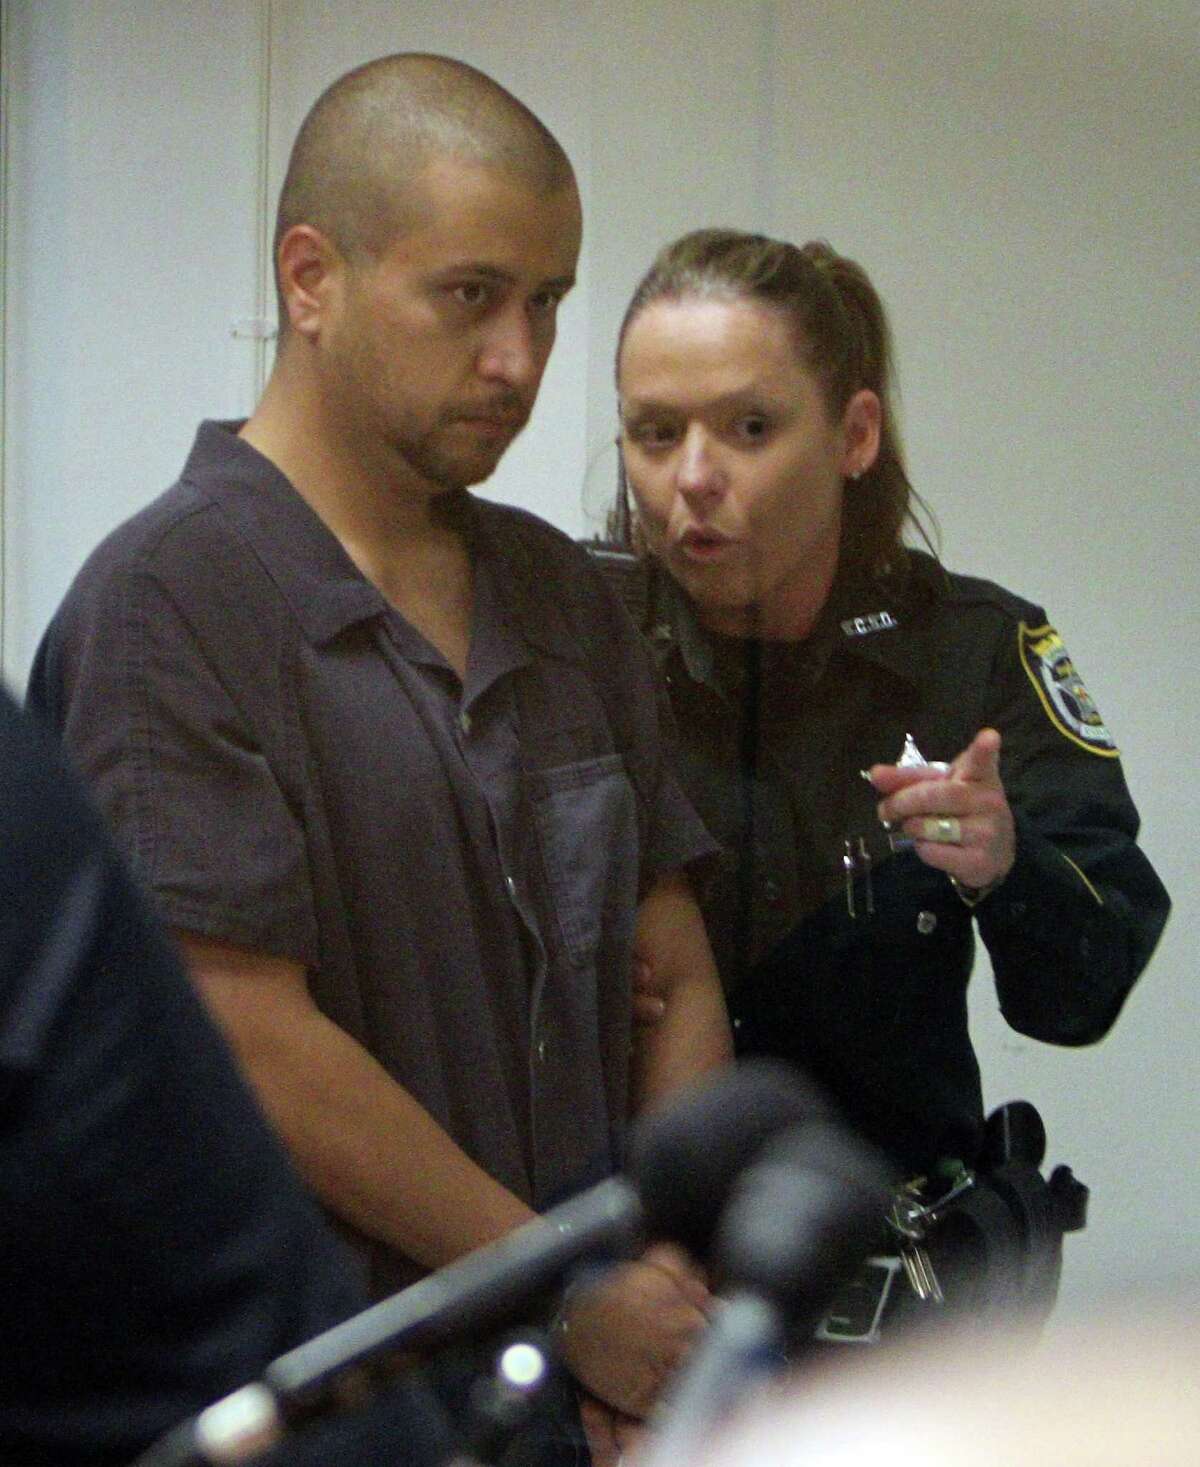 George Zimmerman is directed by a Seminole County Deputy during a court hearing Thursday, April 12, 2012, in Sanford, Fla. Zimmerman has been charged with second-degree murder in the shooting death of the 17-year-old Trayvon Martin. (AP Photo/Gary W. Green, Orlando Sentinel, Pool)